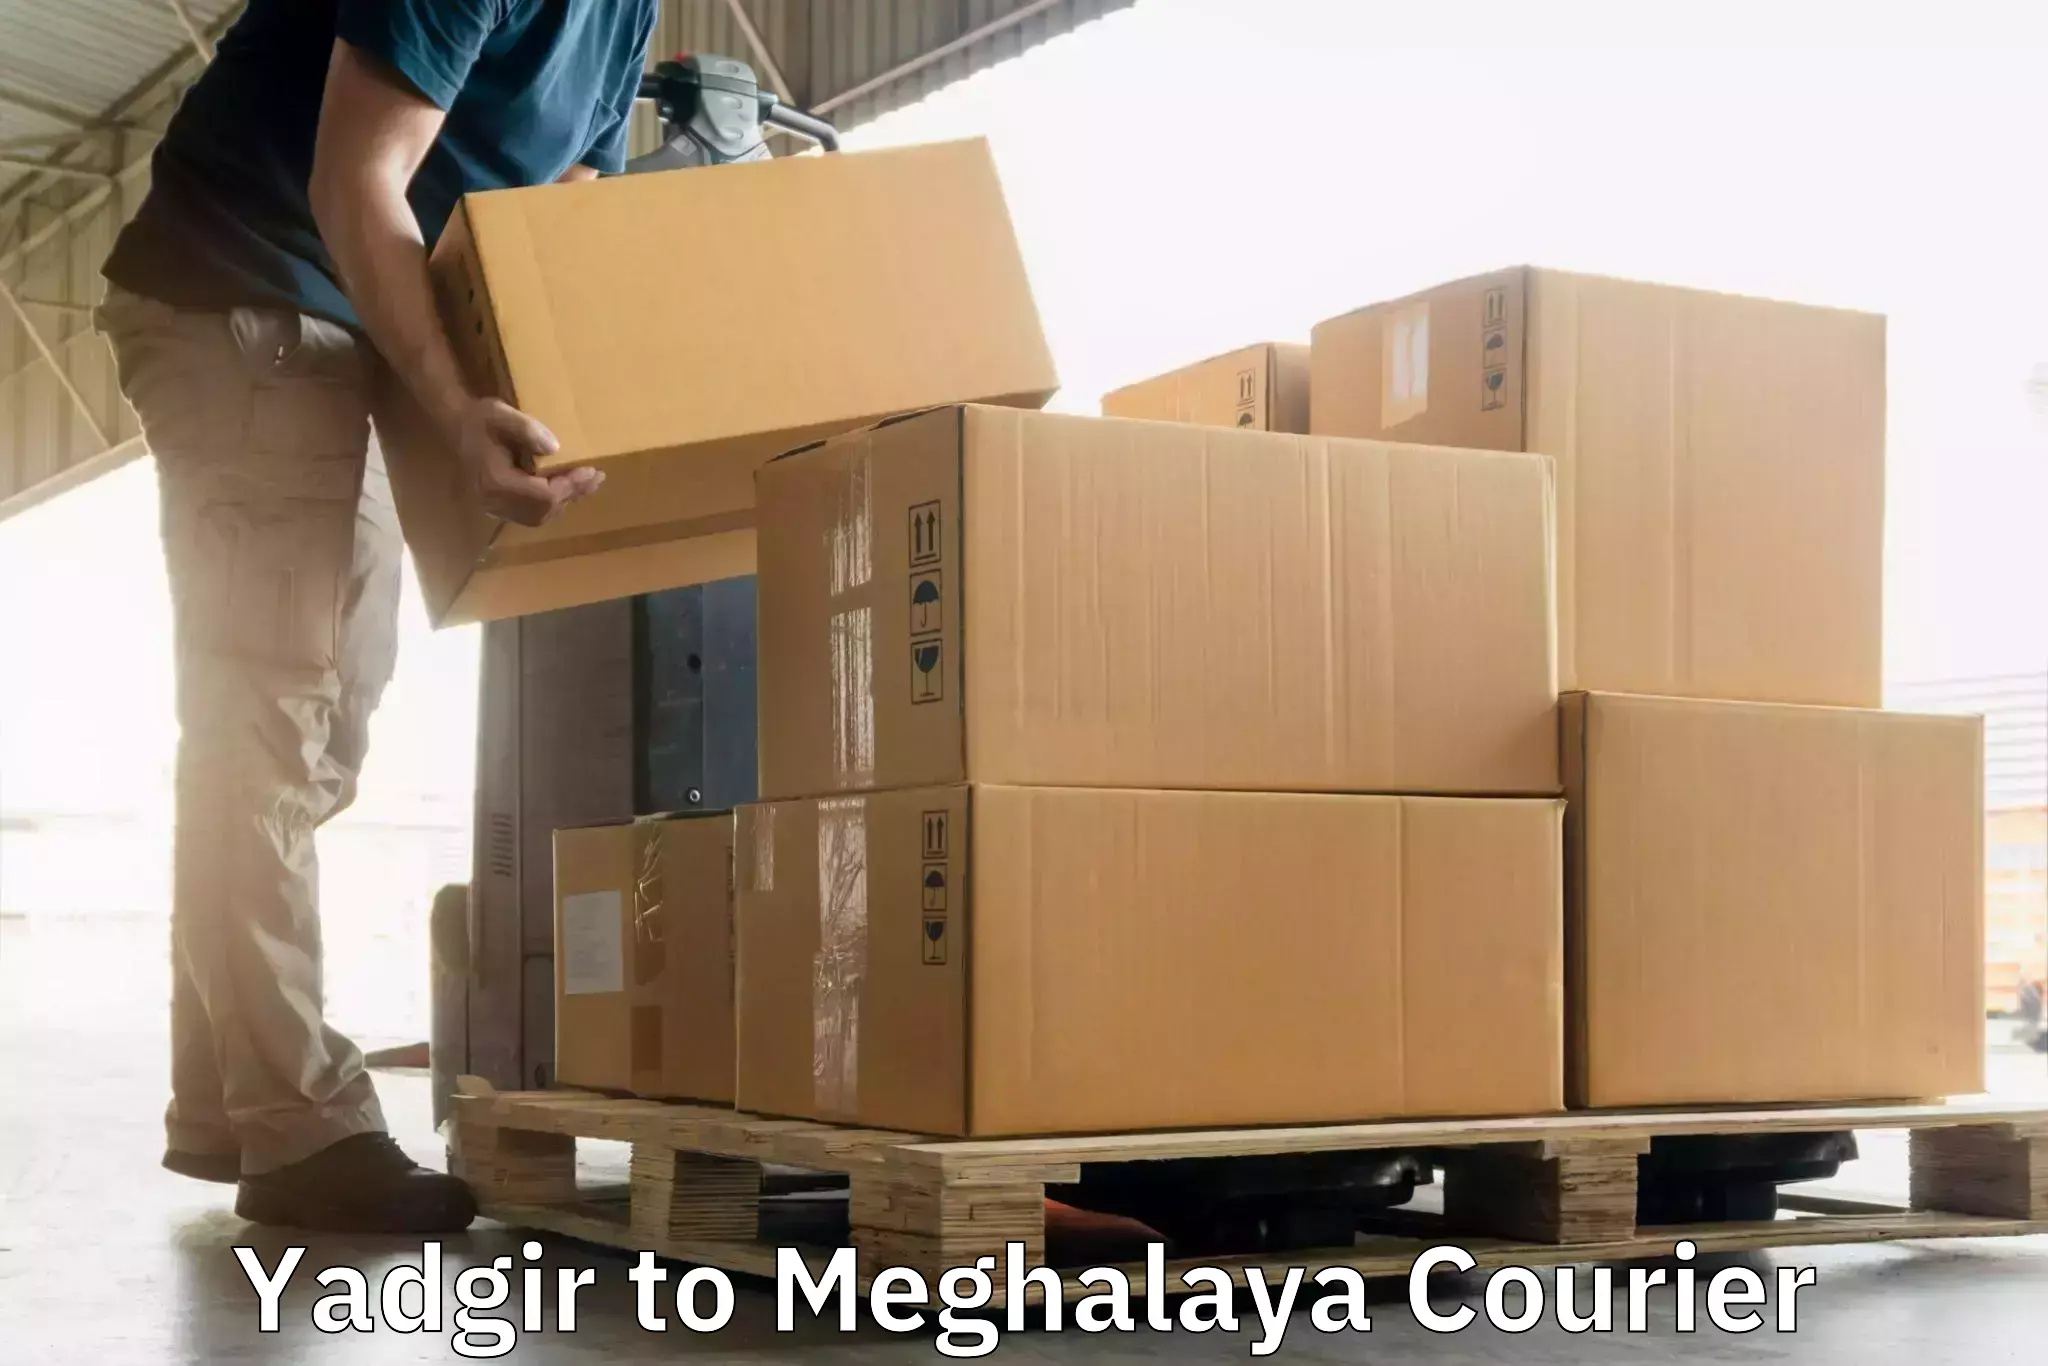 Courier service innovation Yadgir to Dkhiah West